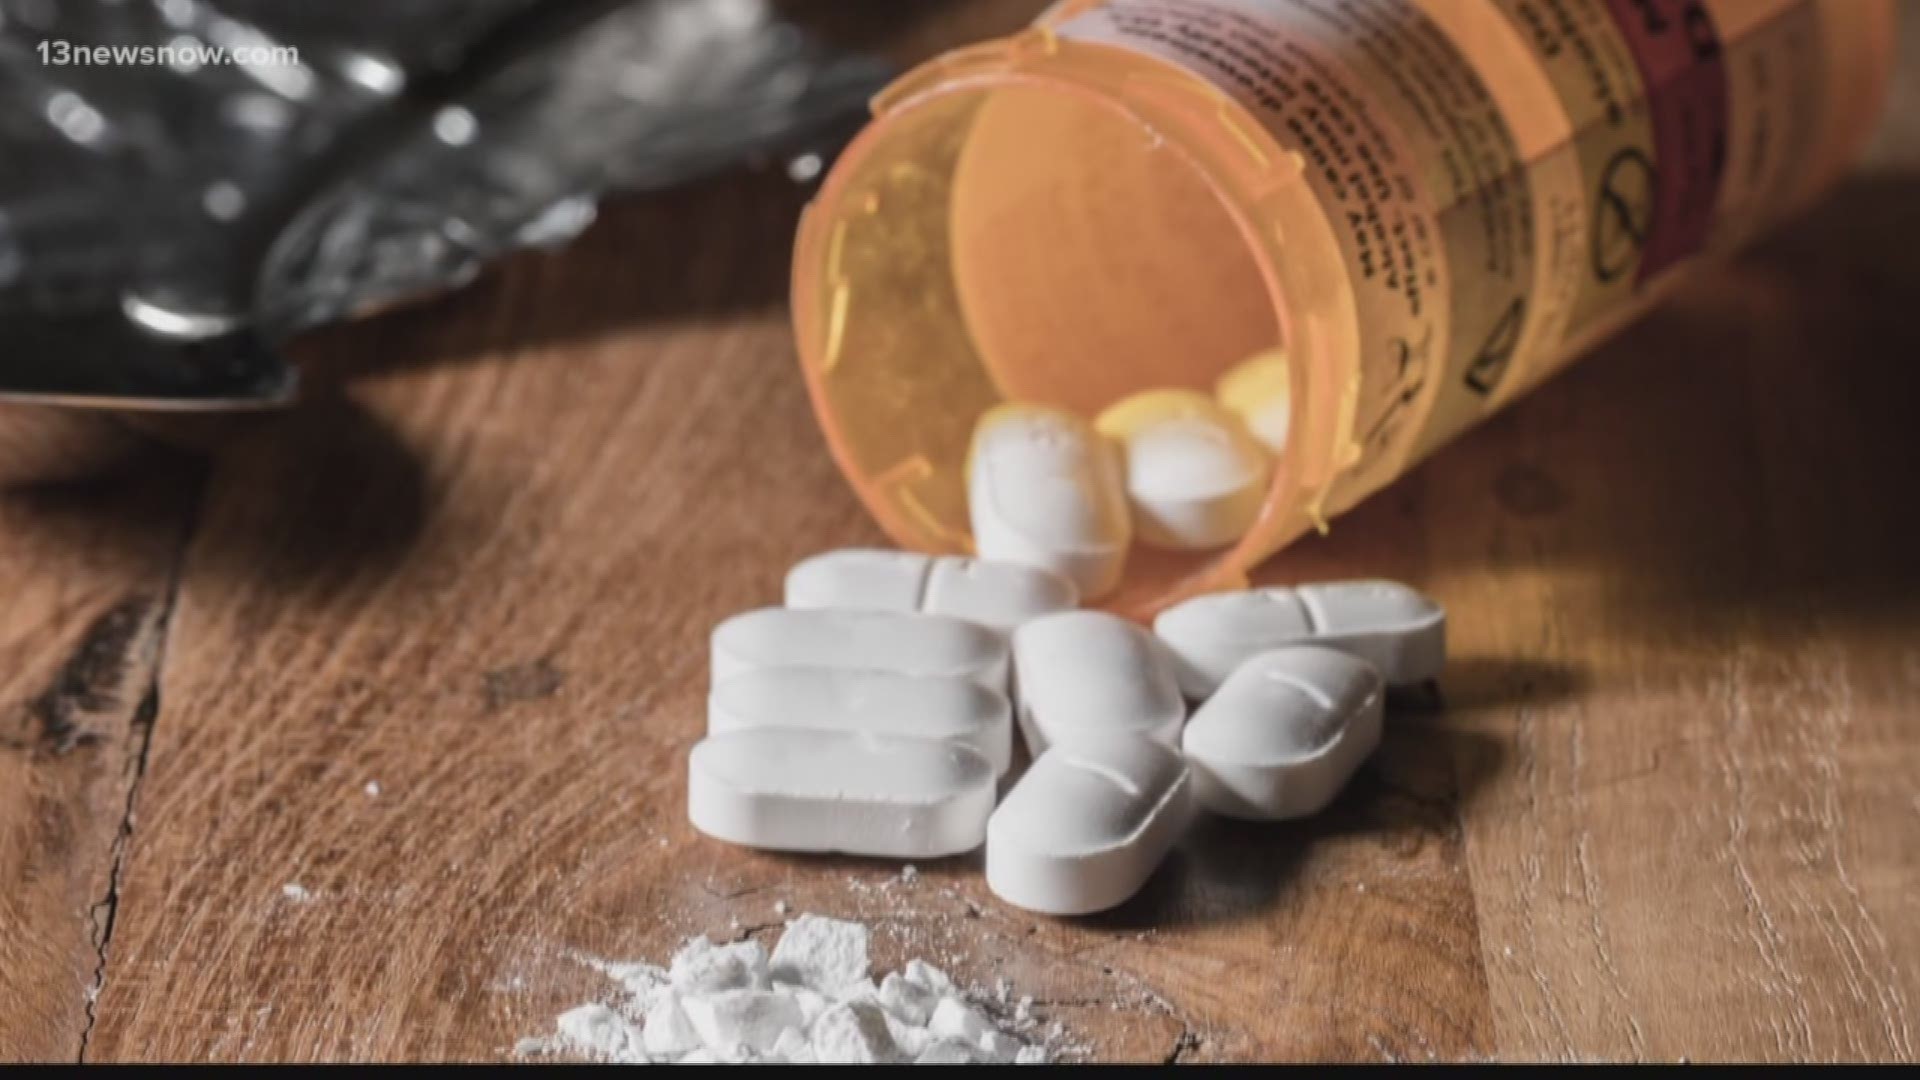 A new study by the CDC found that the number of kids and teens dying from opioid poisoning is spiking.